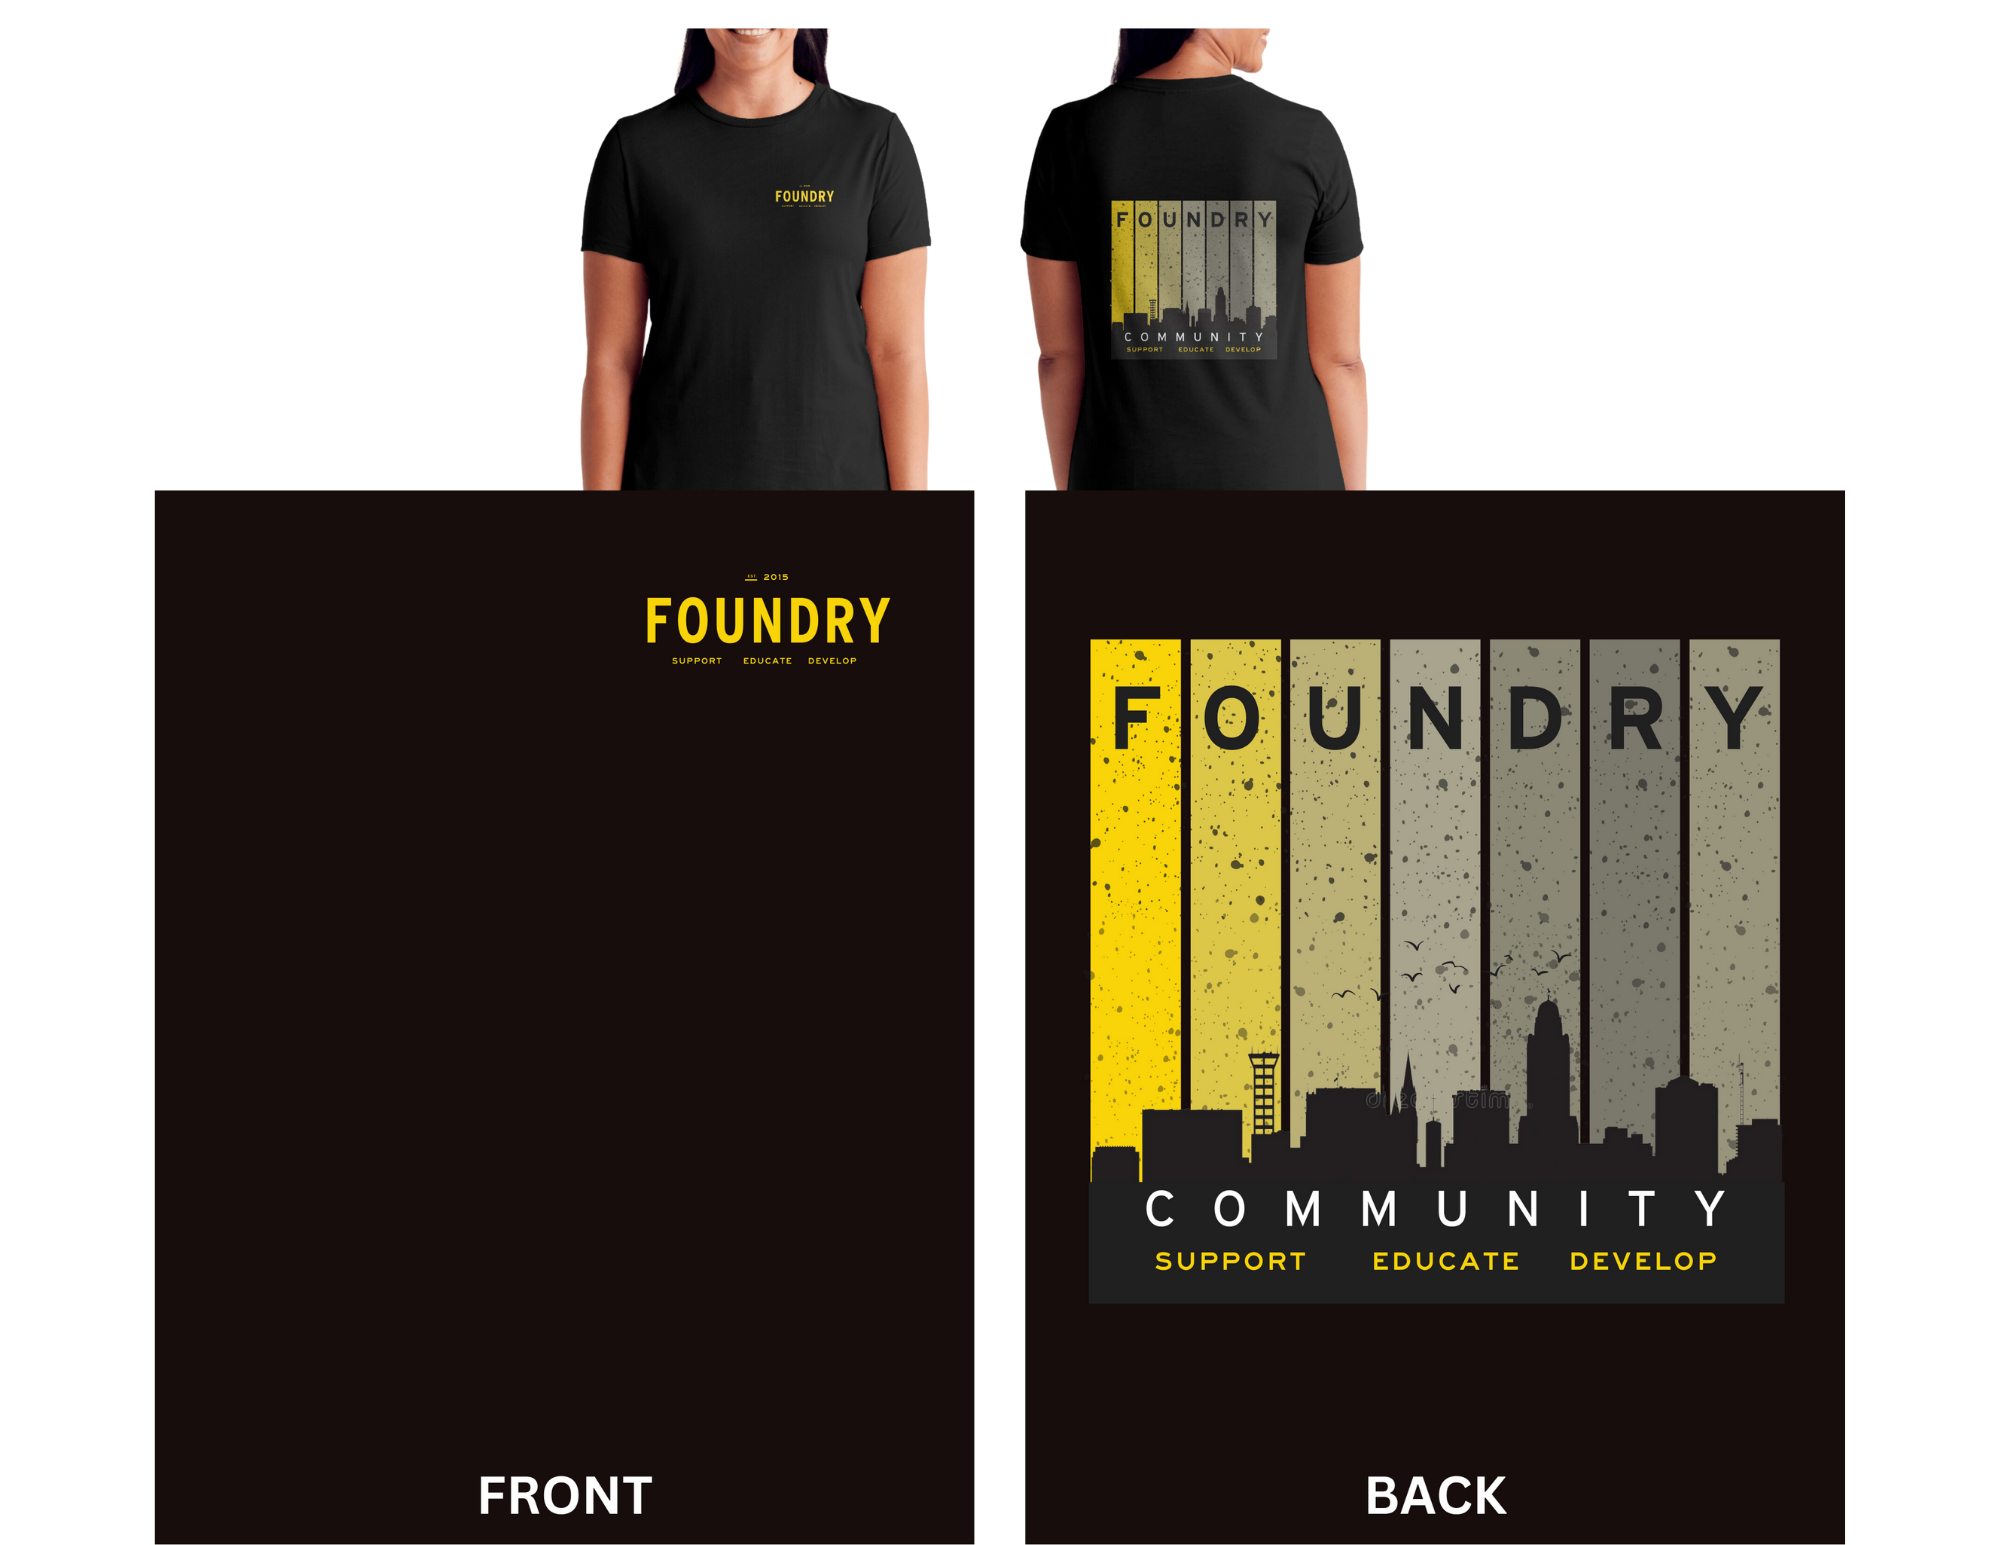 The Foundry Community T-Shirt